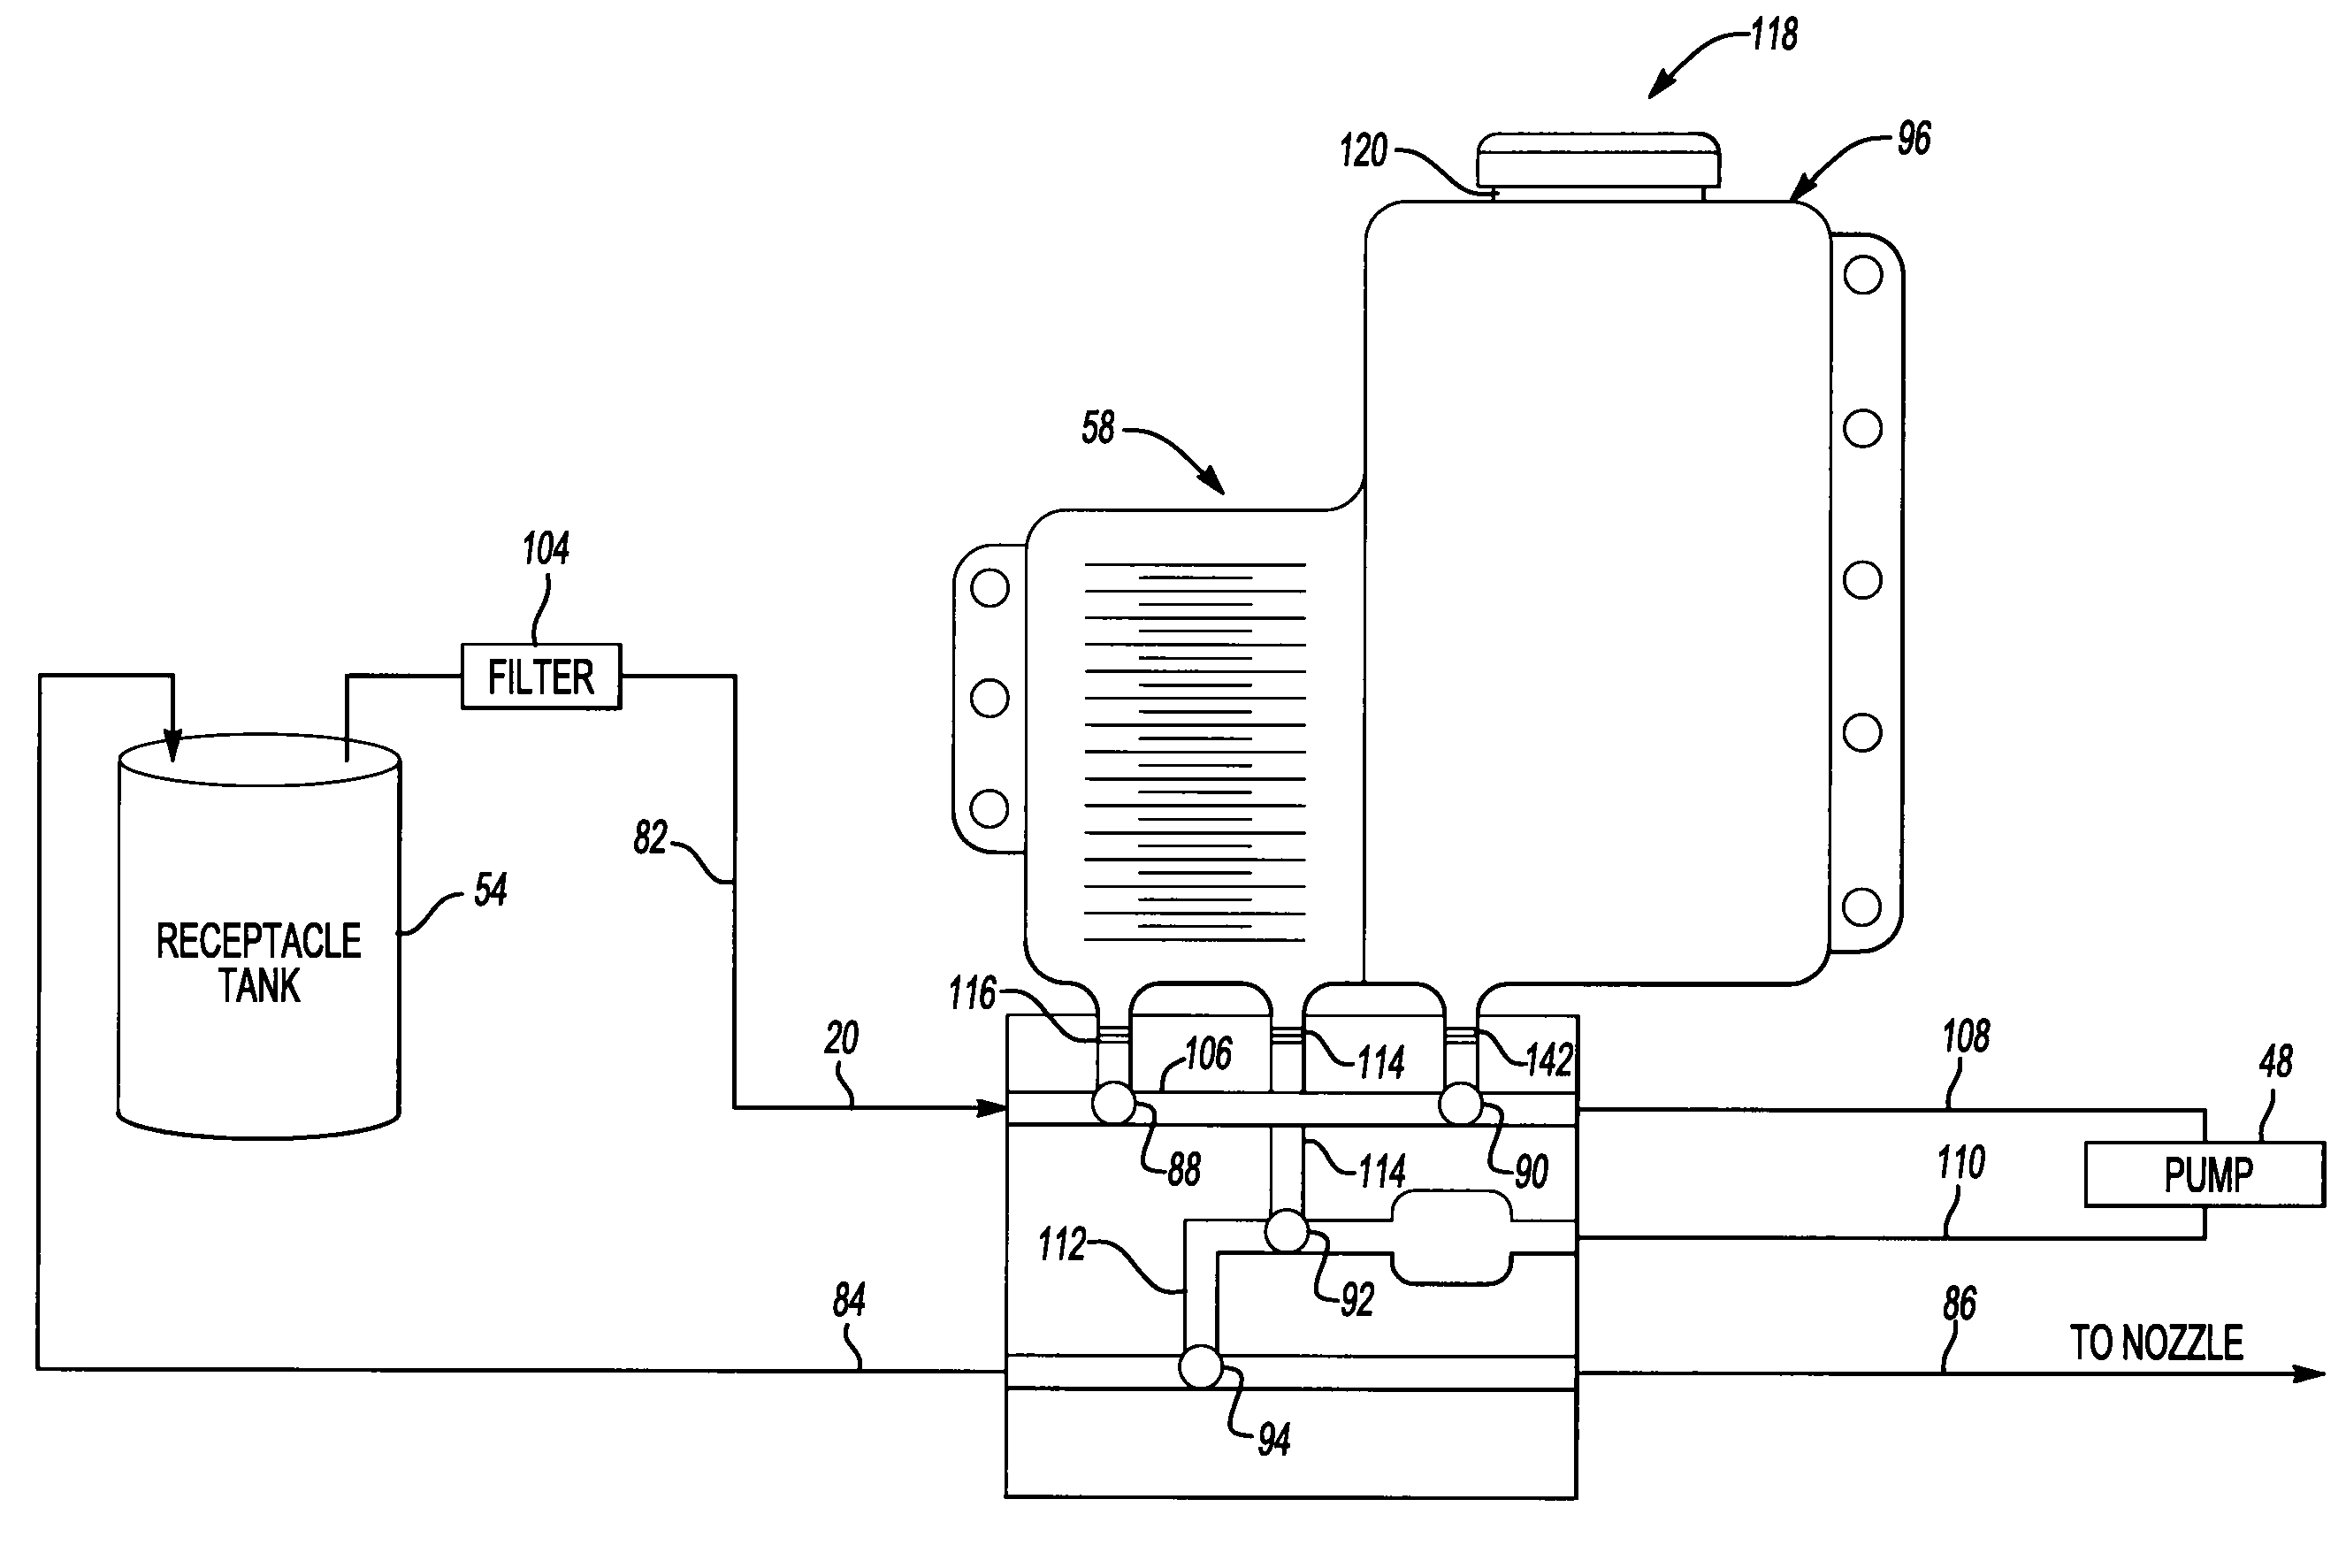 Ultra low volume chemical delivery system and method